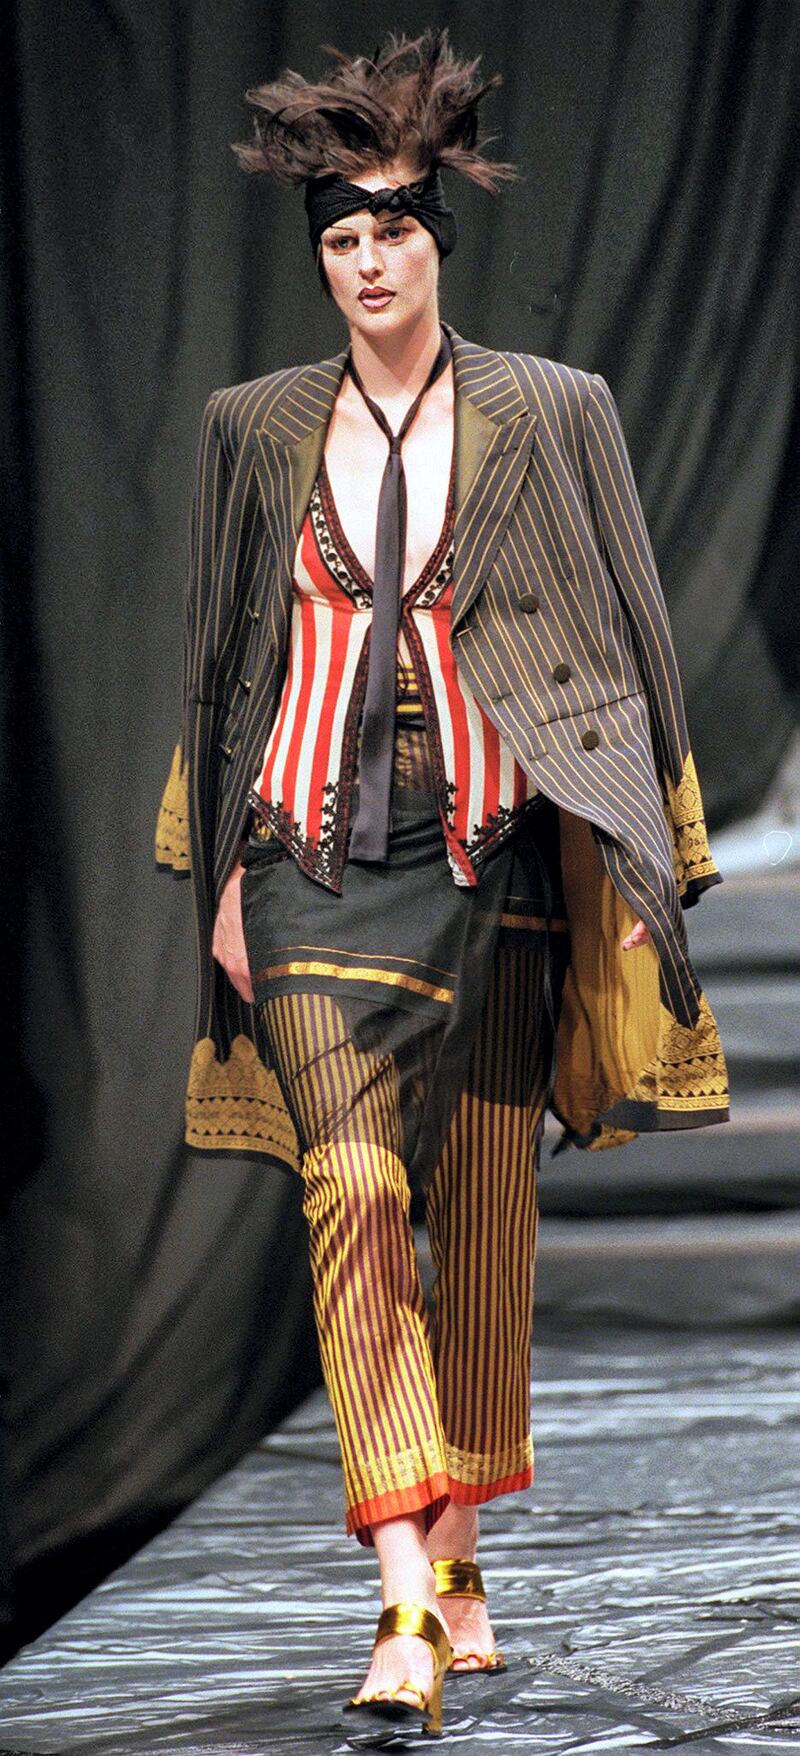 British model Stella Tennant for French designer Jean-Paul Gaultier presents this black and yellow striped jacket over striped trousers with red,white and black striped waist coat as part of his 1997 Spring/Summer ready-to-wear fashion collection October 11.The Paris fashion season runs through next week.

FRANCE FASHION